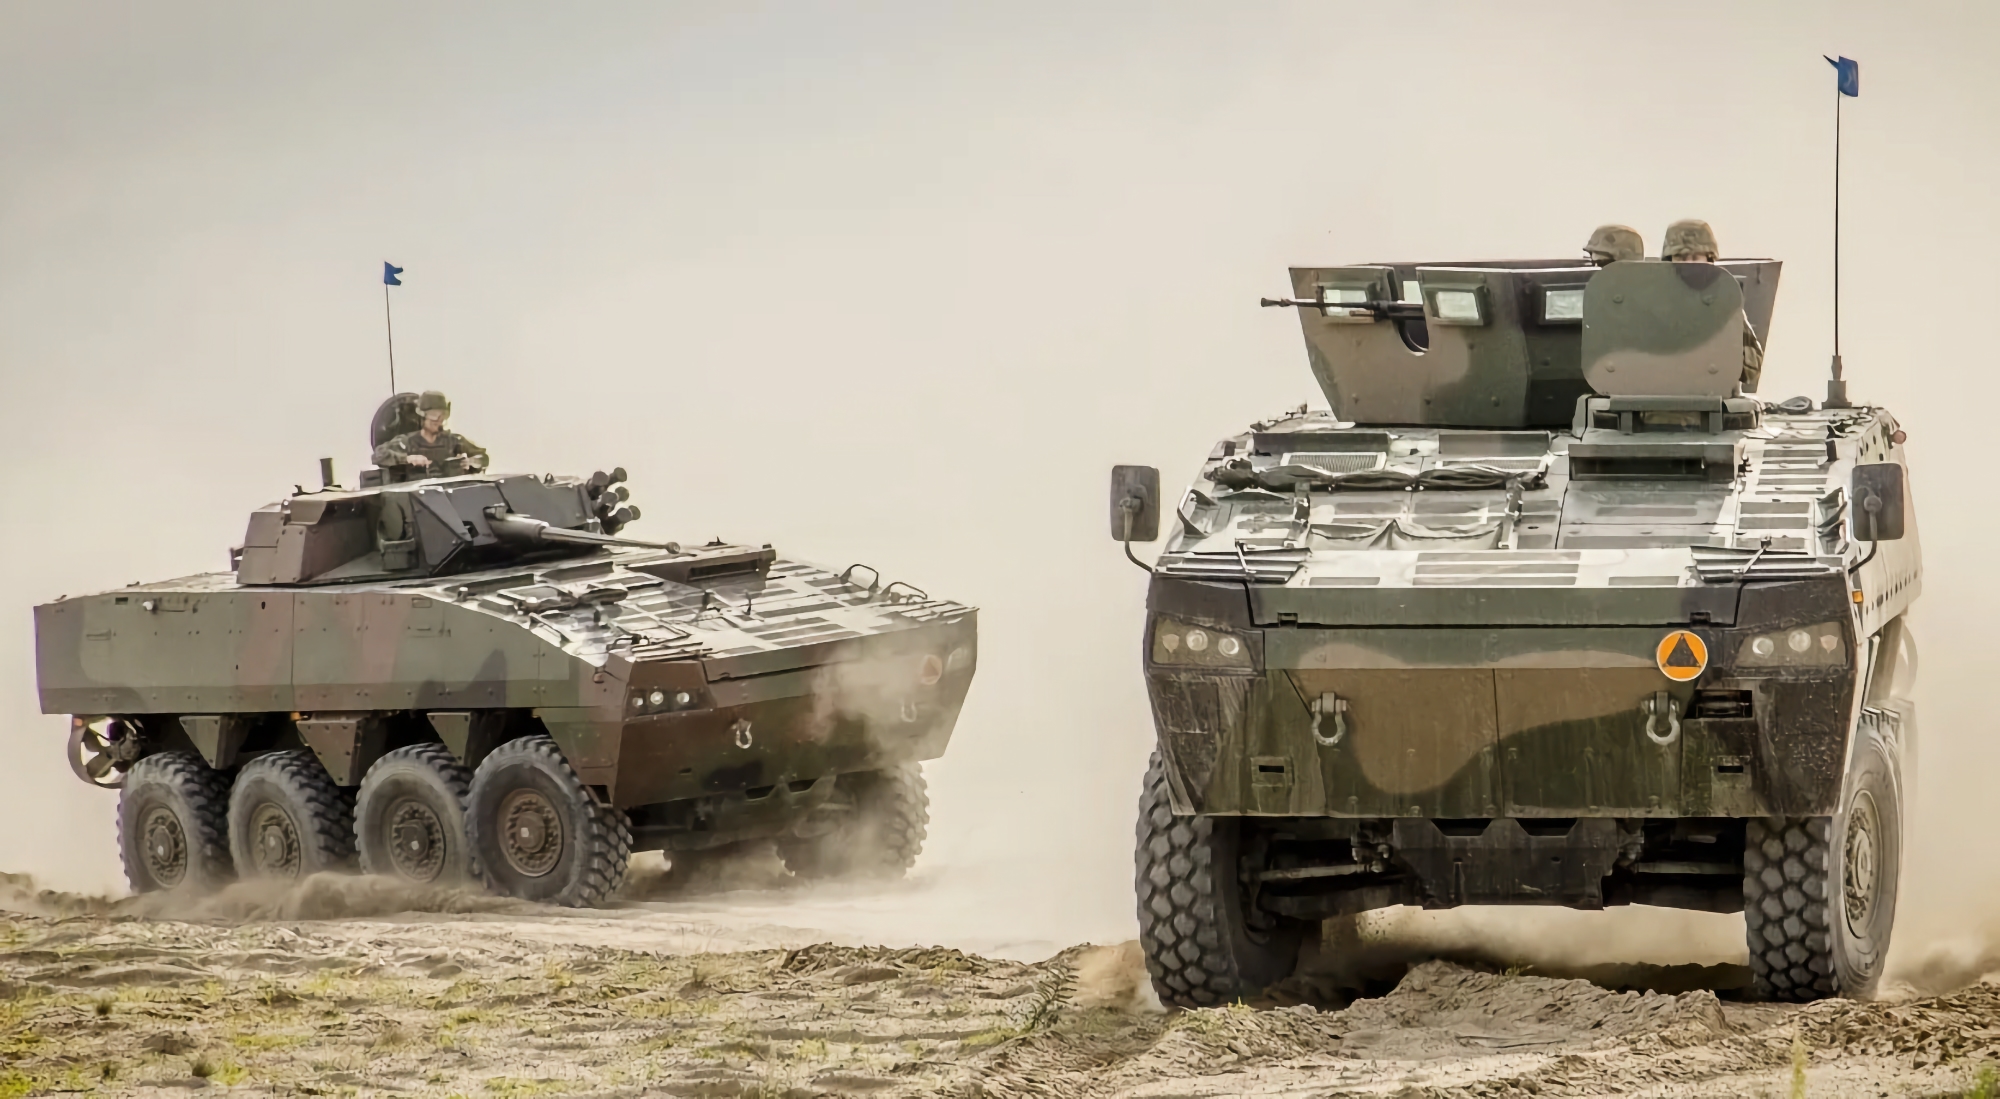 The AFU is already using Polish Rosomak armoured personnel carriers, the combat vehicles appeared in the video along with Stridsvagn 122 tanks and CV9040 BMPs